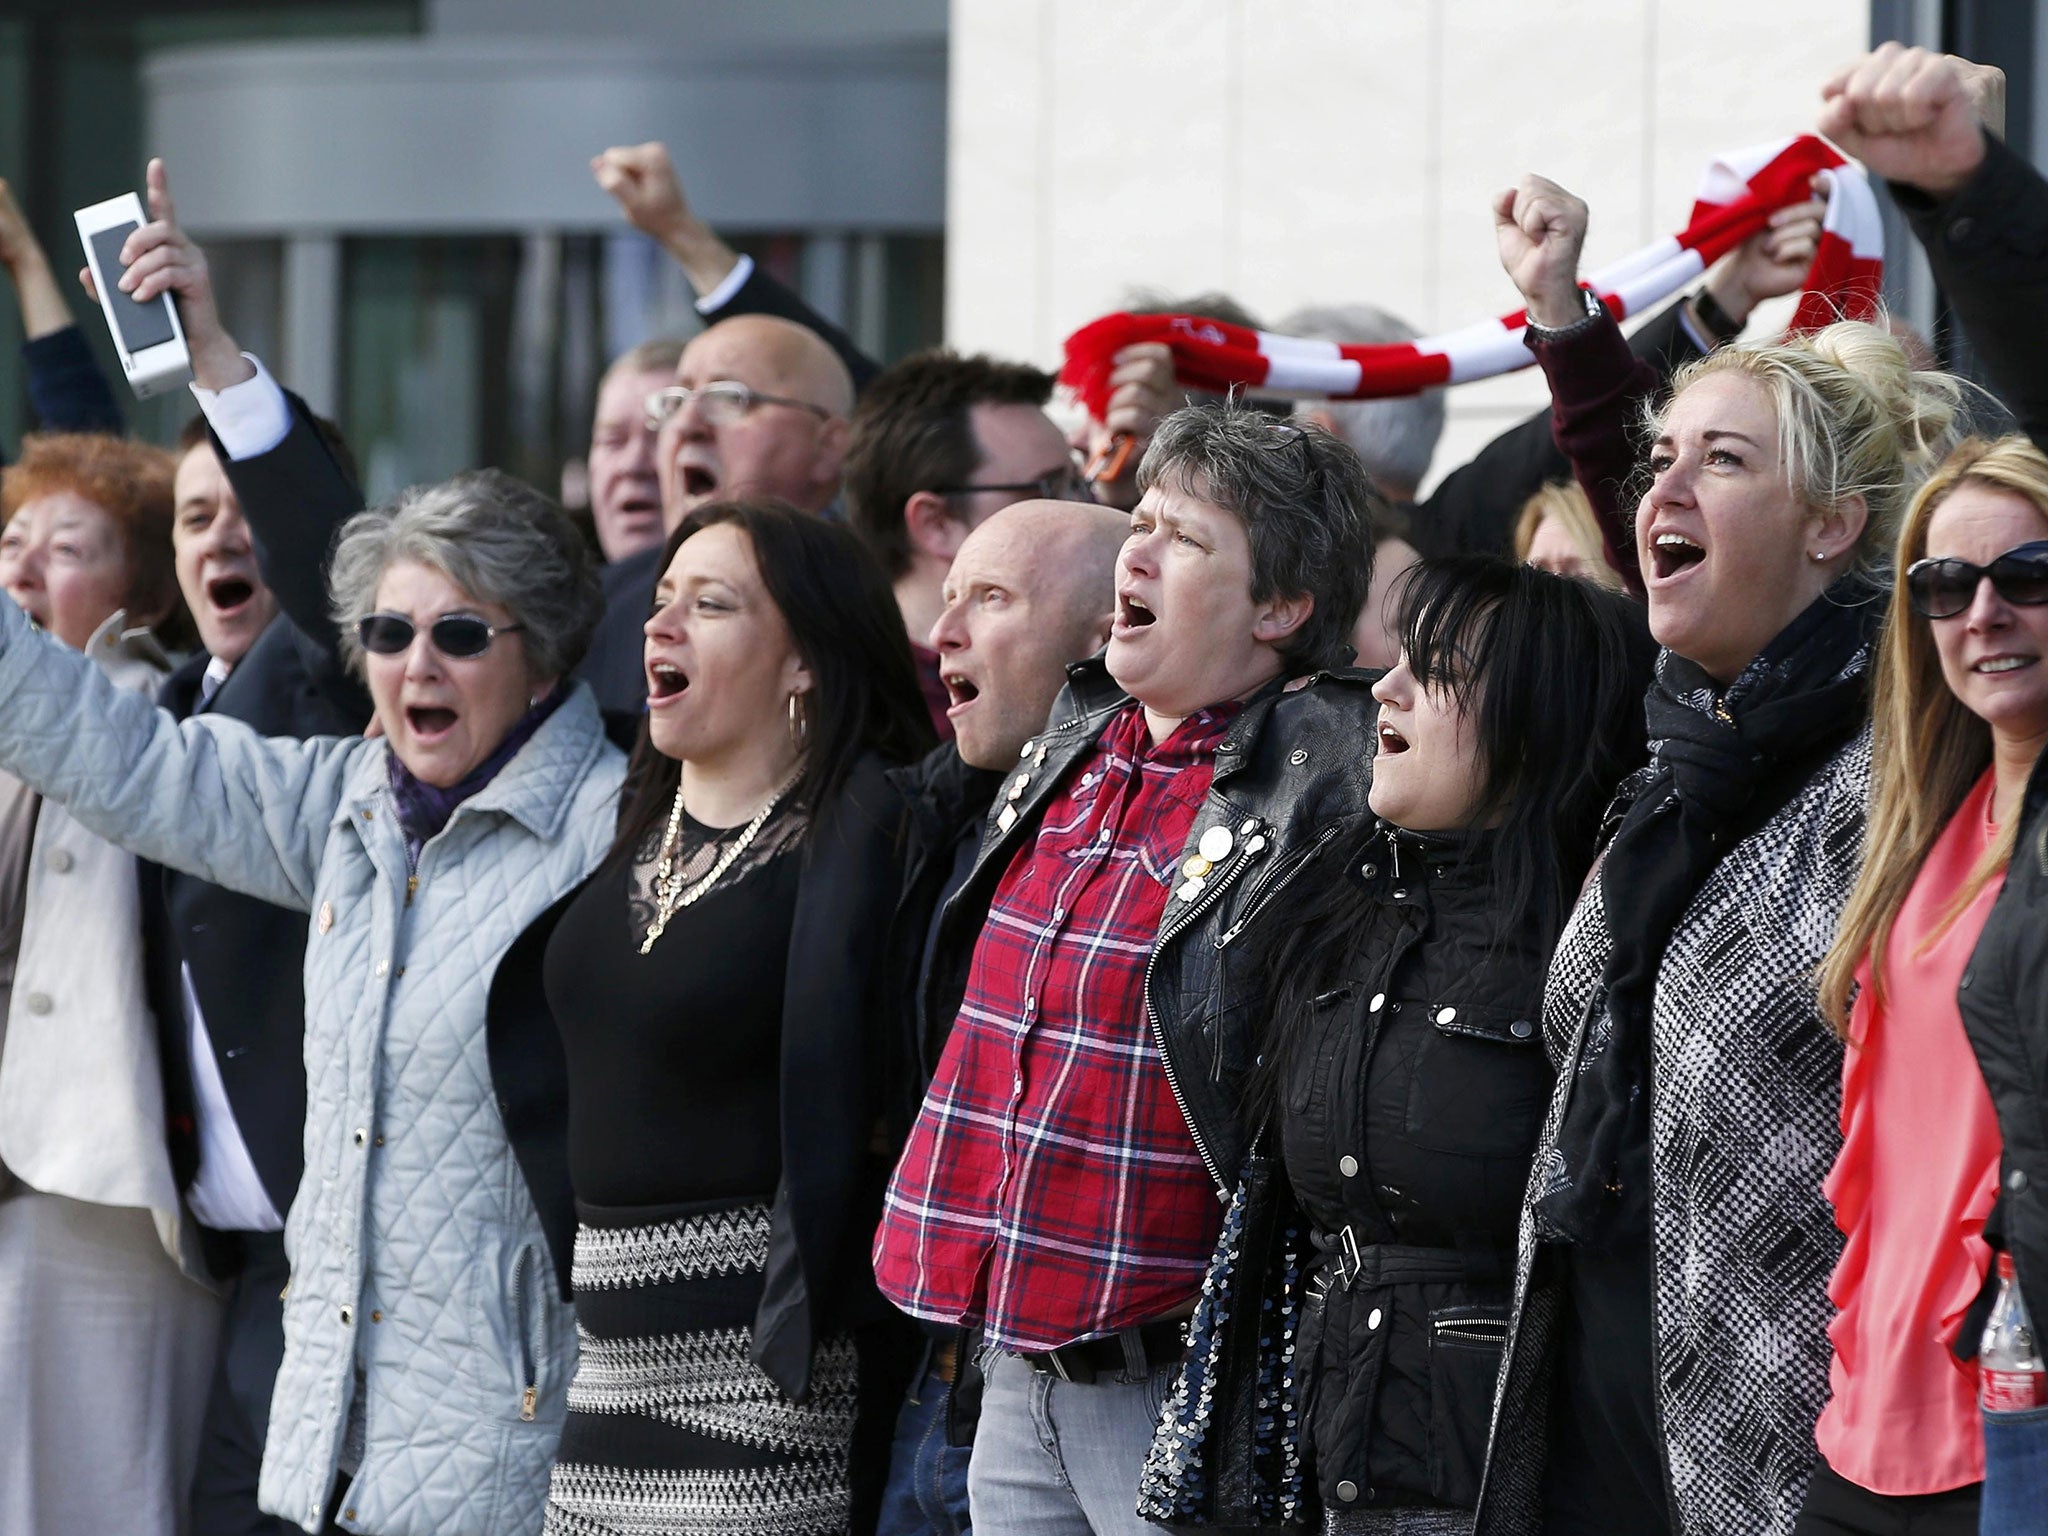 Relatives sing "You'll never walk alone" after the jury delivered its verdict at the new inquests into the Hillsborough disaster, in Warrington, Britain April 26, 2016.